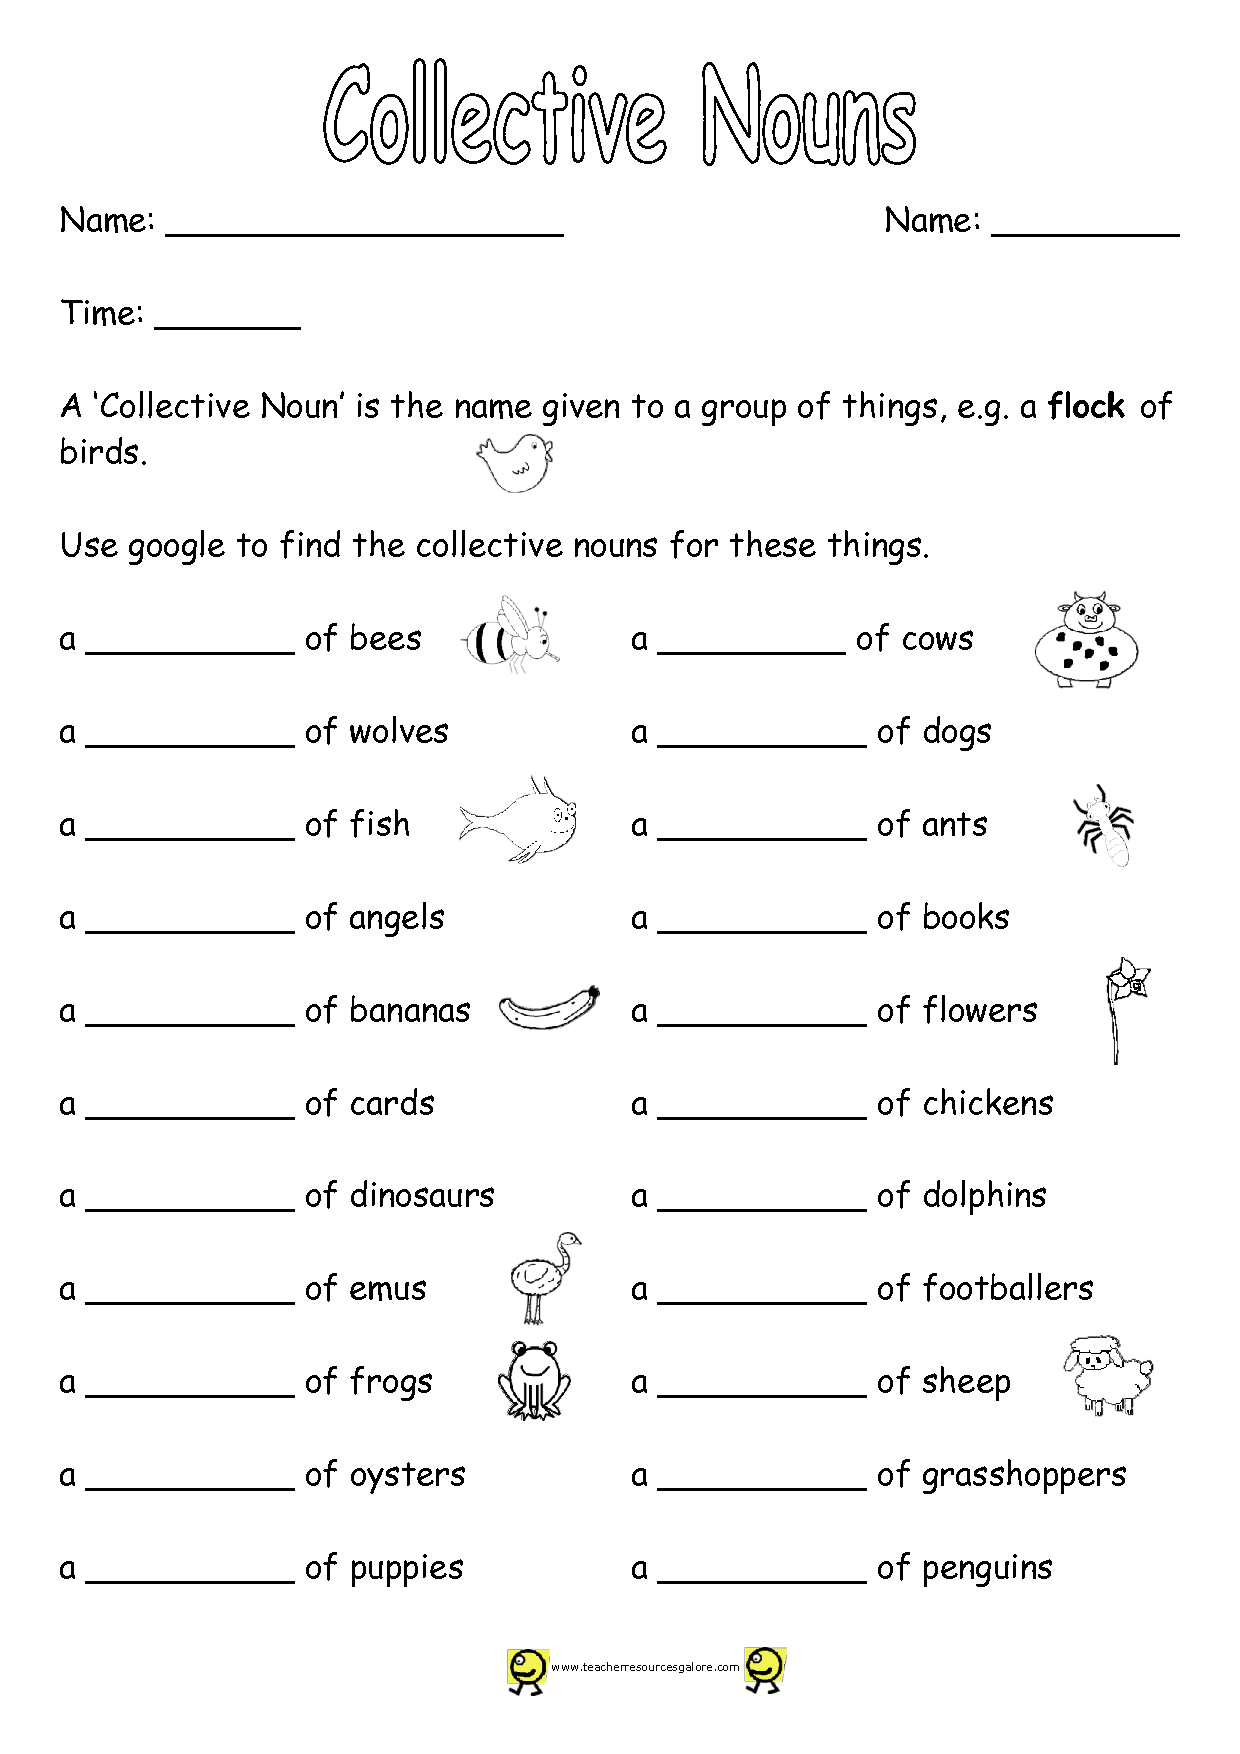 17-best-images-of-noun-coloring-worksheets-2nd-grade-collective-nouns-worksheet-printable